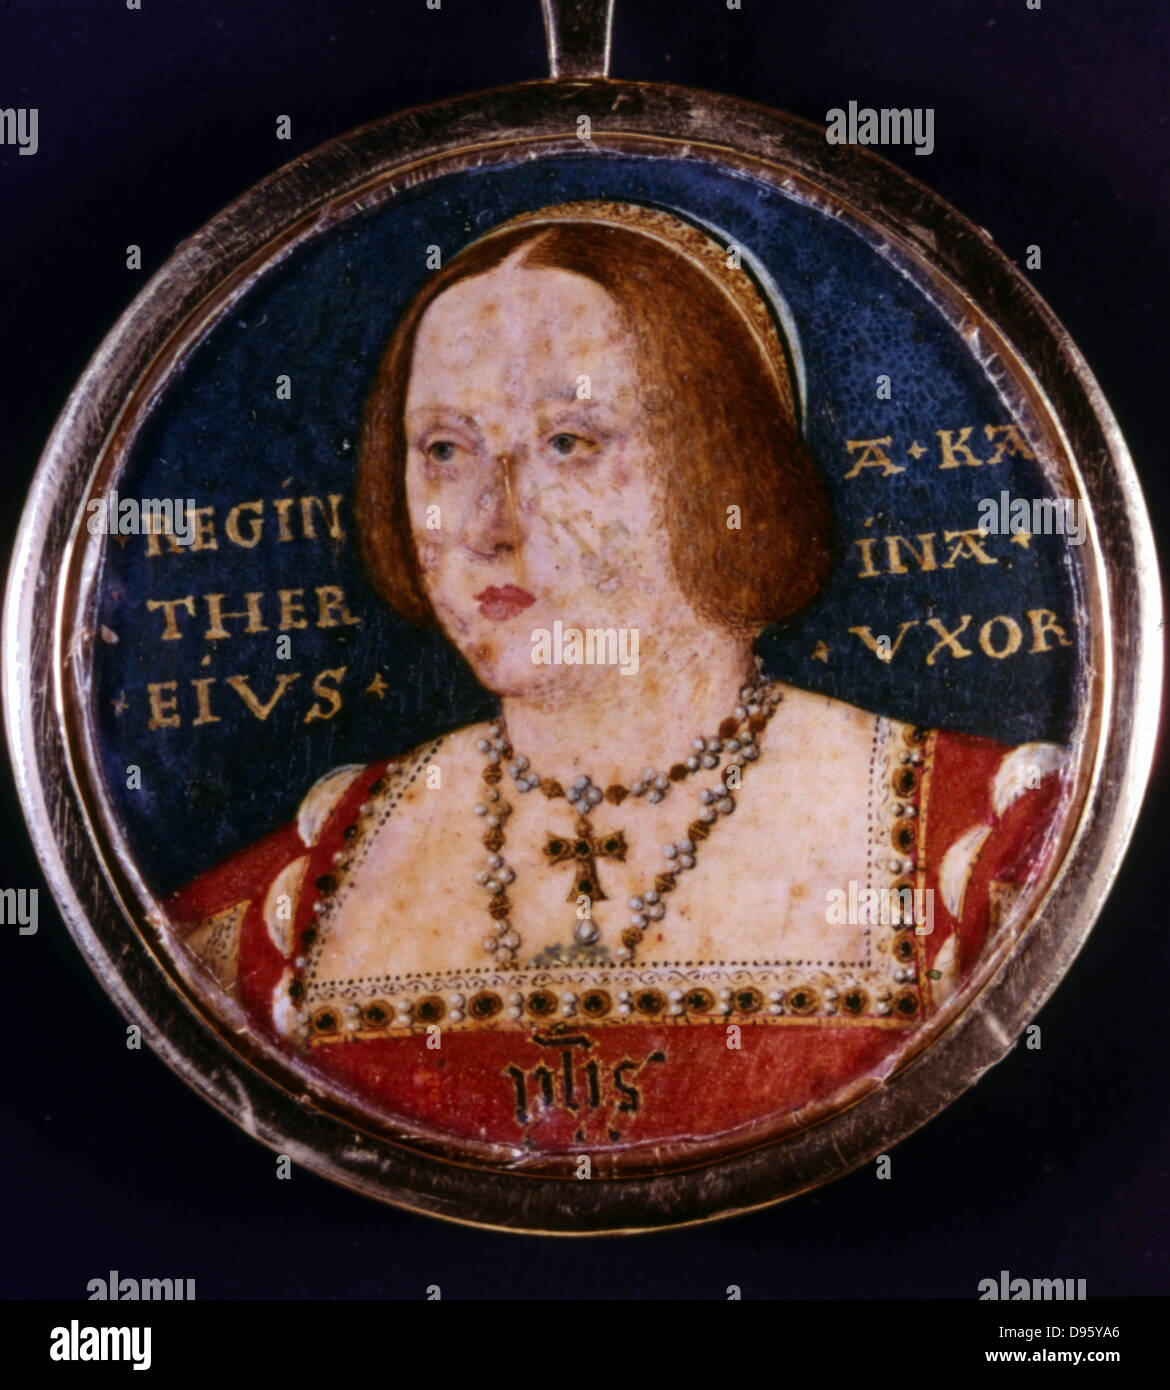 Catherine of Aragon (1485-1536) first wife of Henry VIII of England, Daughter of Ferdinand and Isabella of Spain. Miniature attributed to Horneholte. Stock Photo